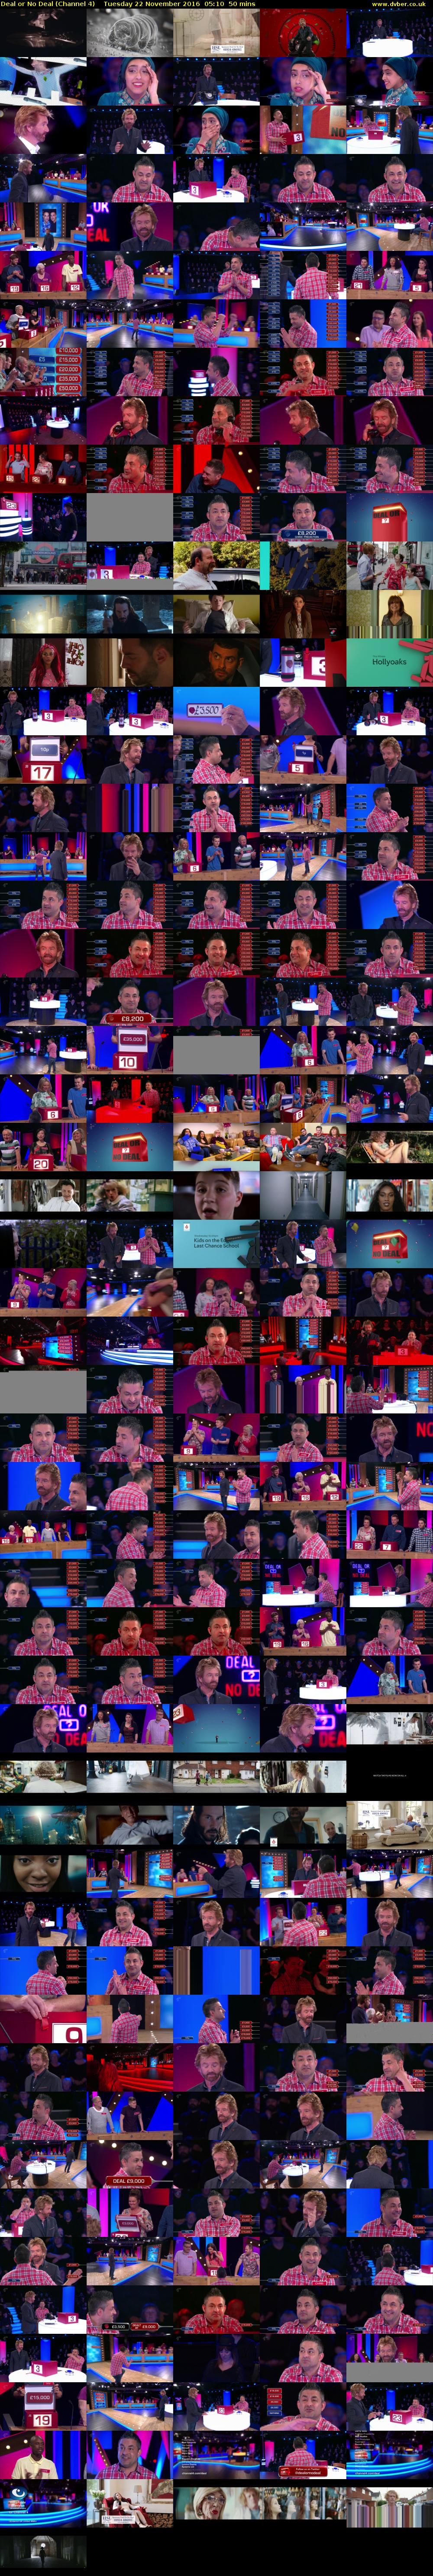 Deal or No Deal (Channel 4) Tuesday 22 November 2016 05:10 - 06:00